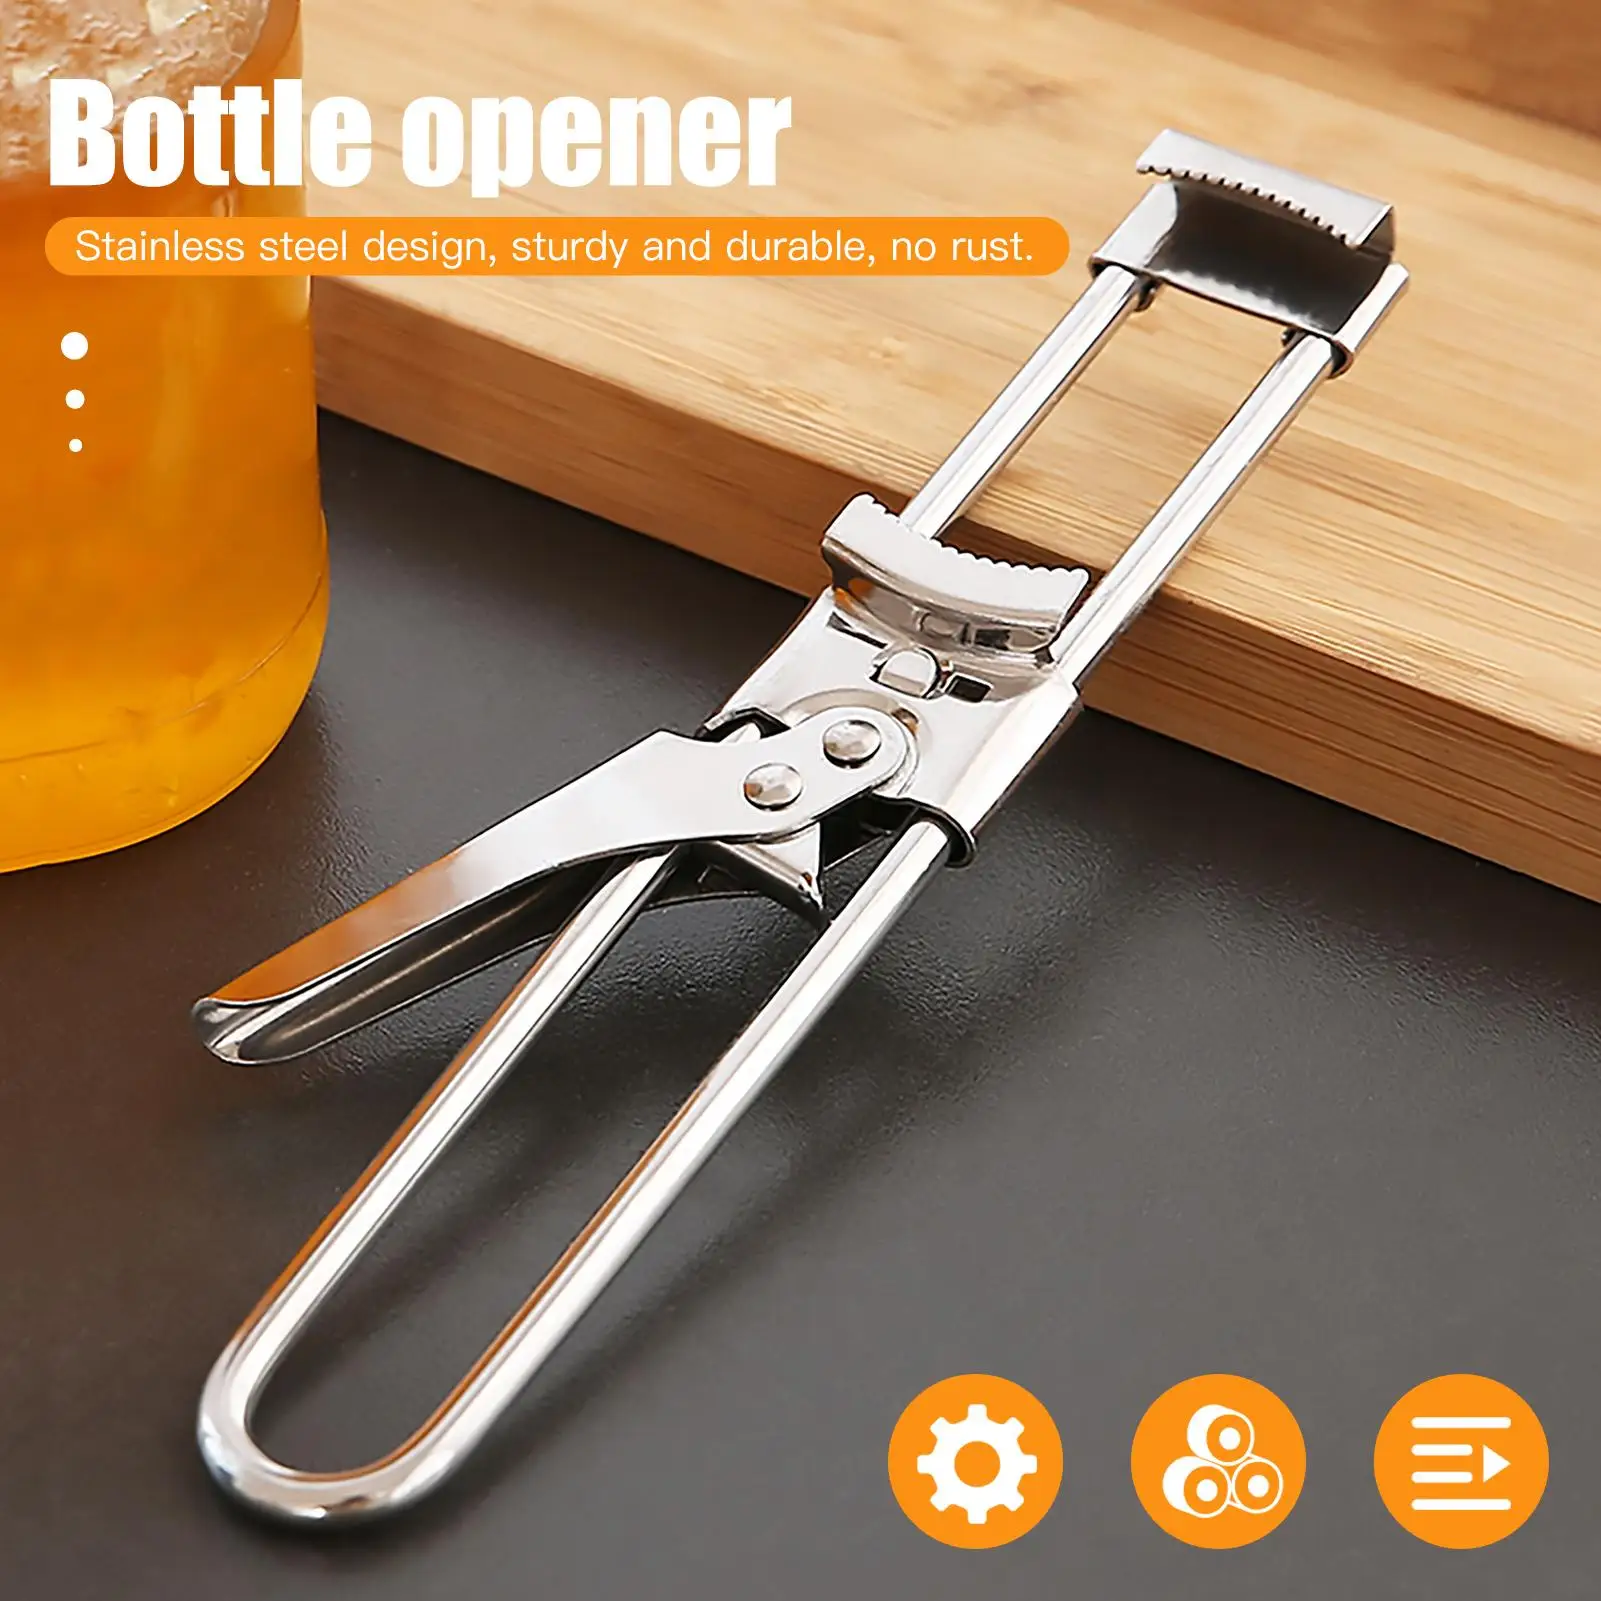 Can Opener Multifunction Stainless Steel Bottle Opener Portable Can Opener  Jam Open Bottle Adjustable Manual Opener Kitchen Tool